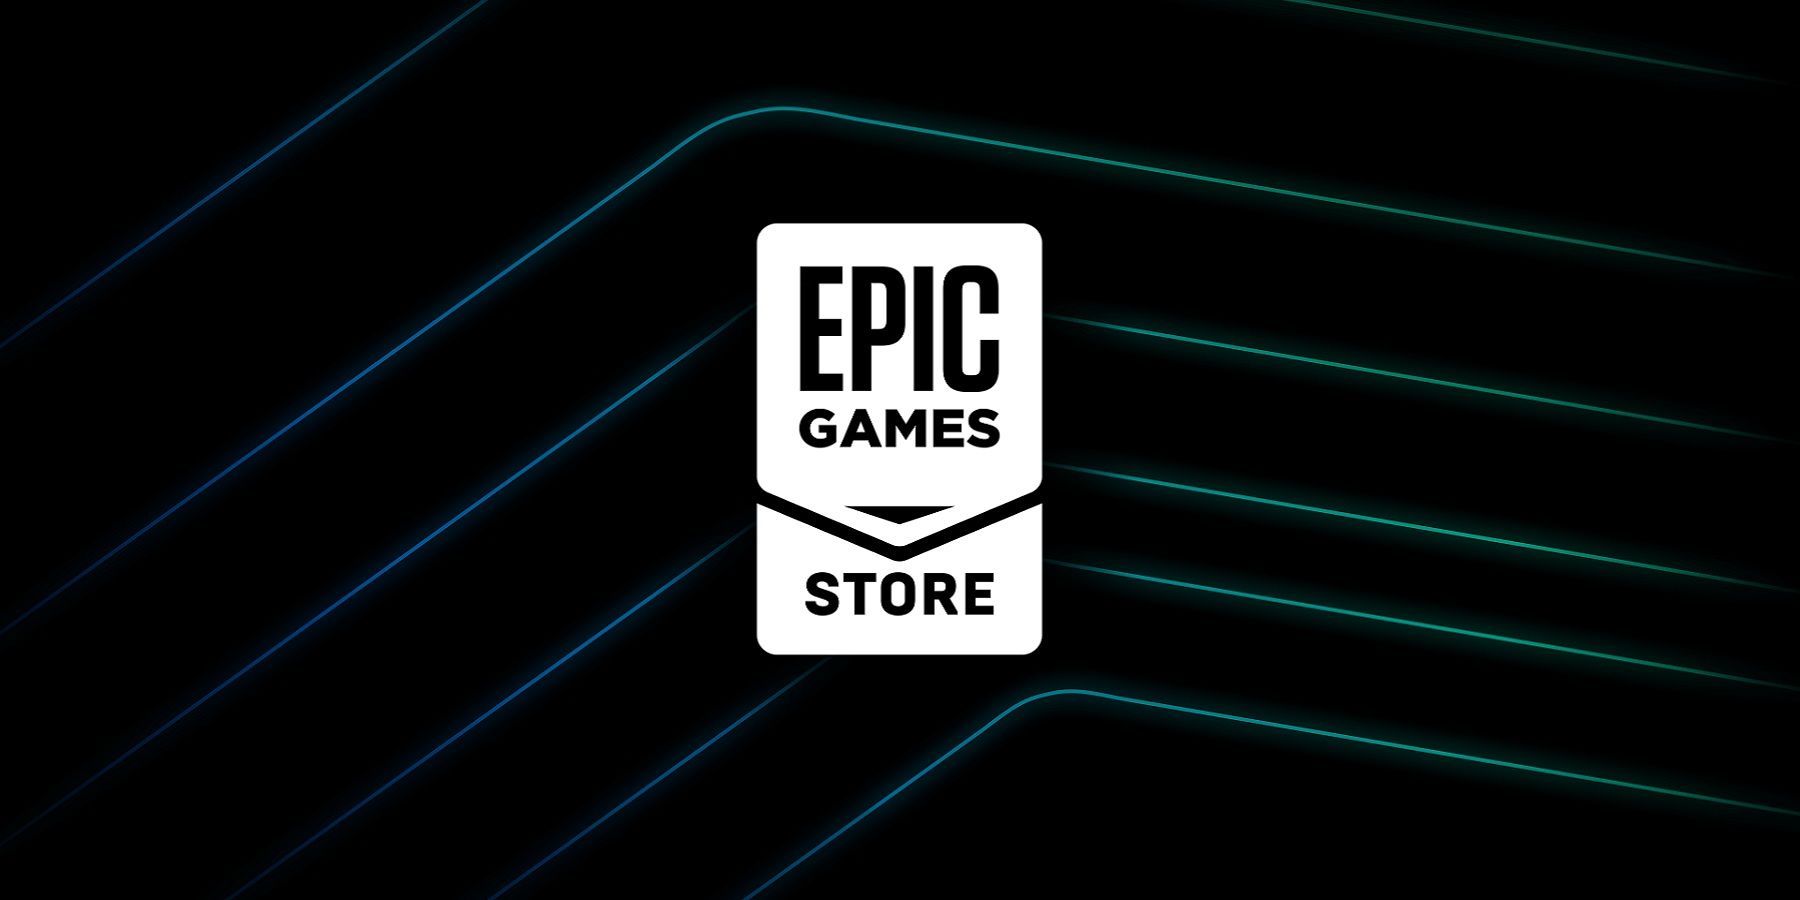 epic games store logo with lines in background